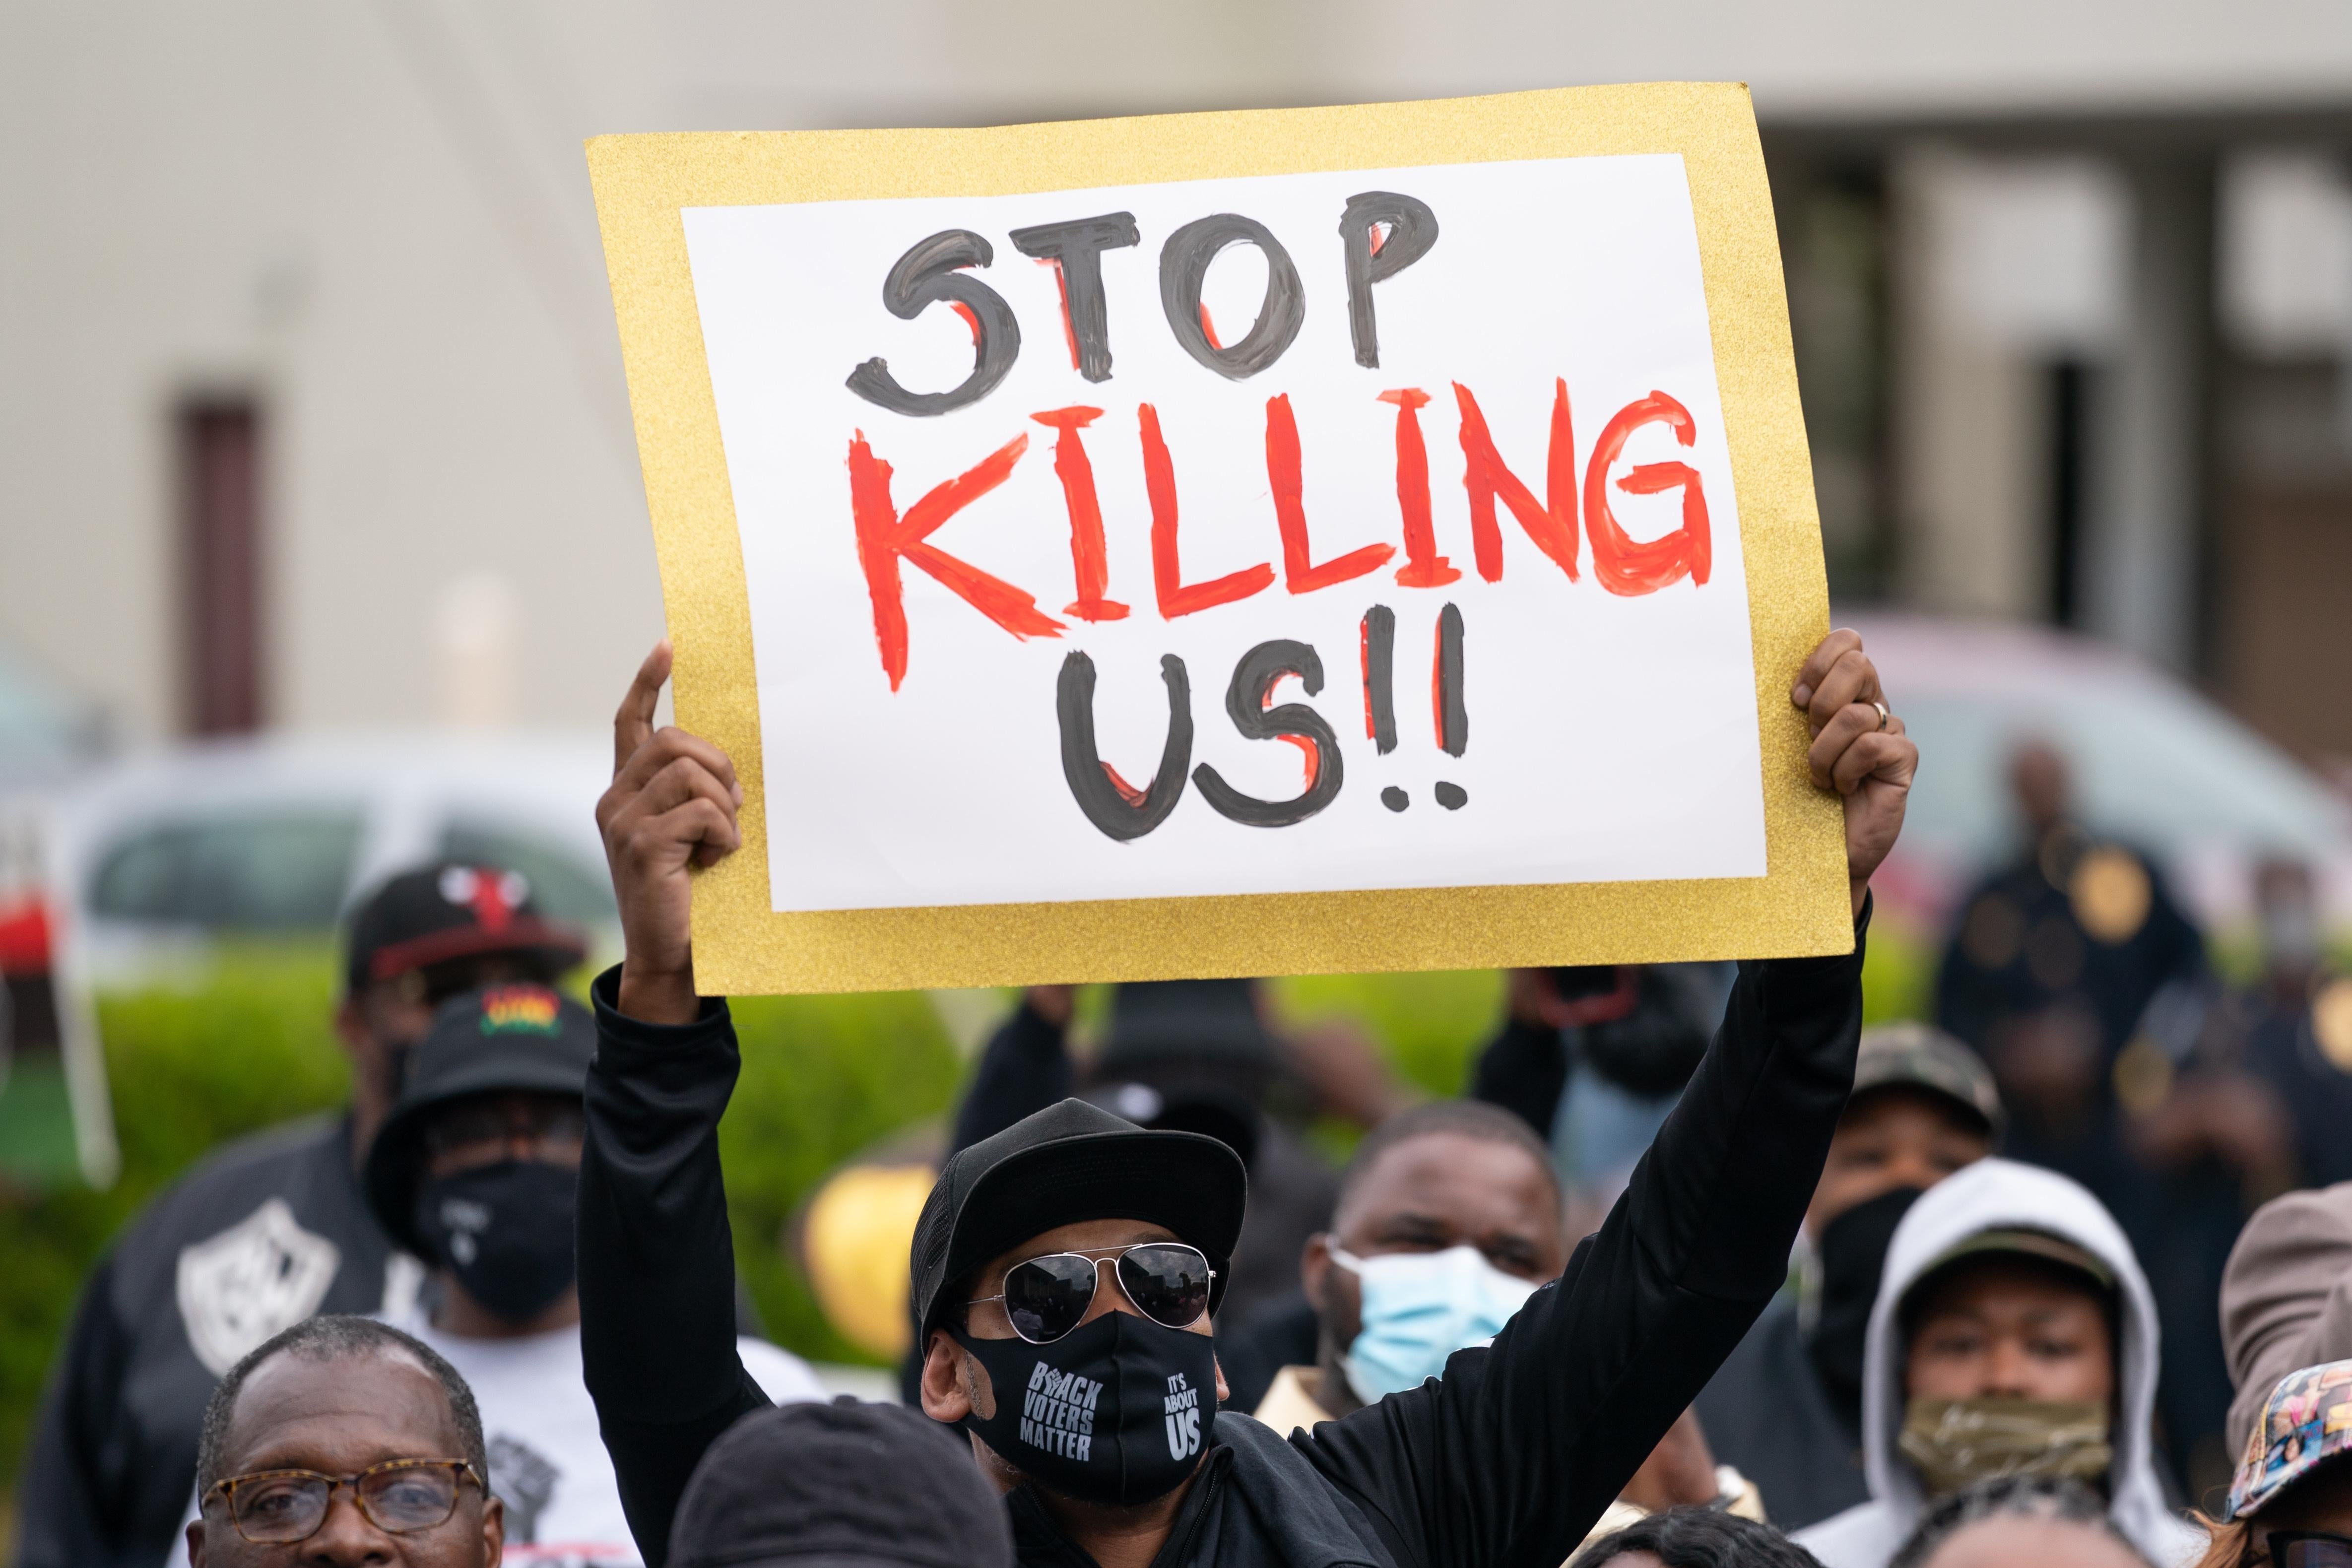 Demonstrators gather outside a government building during an emergency city council meeting April 23, 2021 in Elizabeth City, North Carolina. 